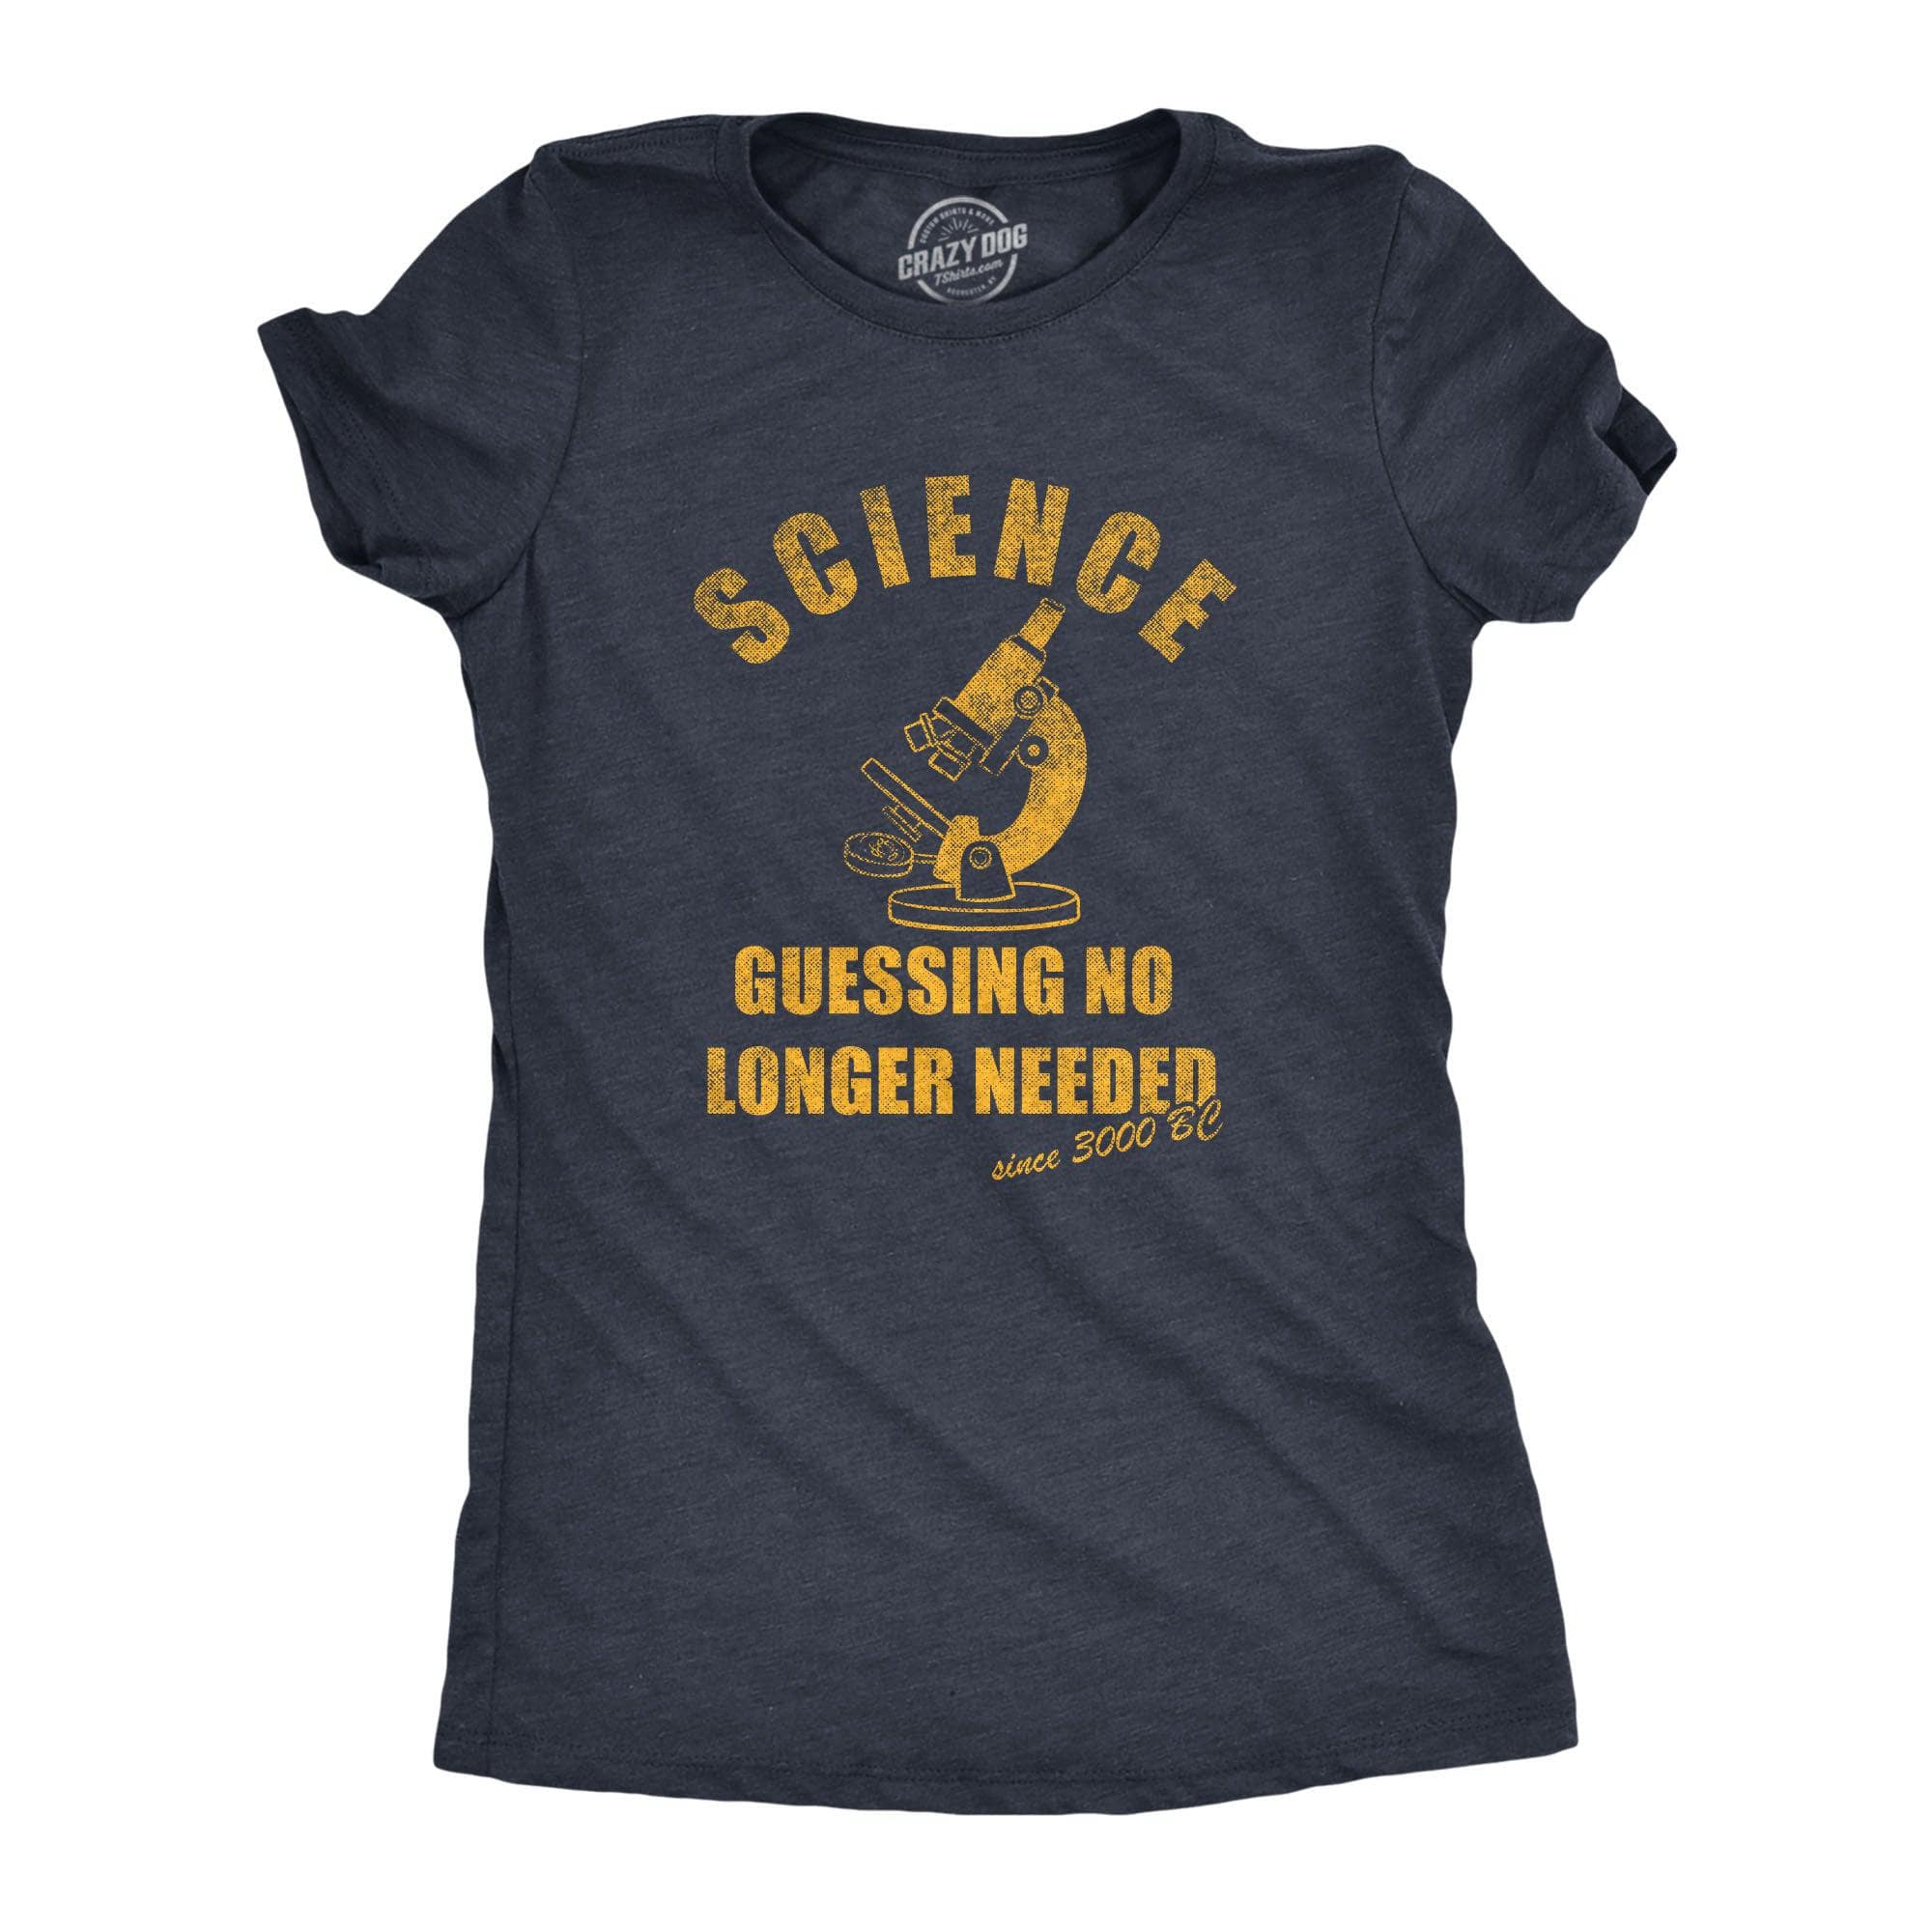 Science Guessing No Longer Needed Women's Tshirt  -  Crazy Dog T-Shirts